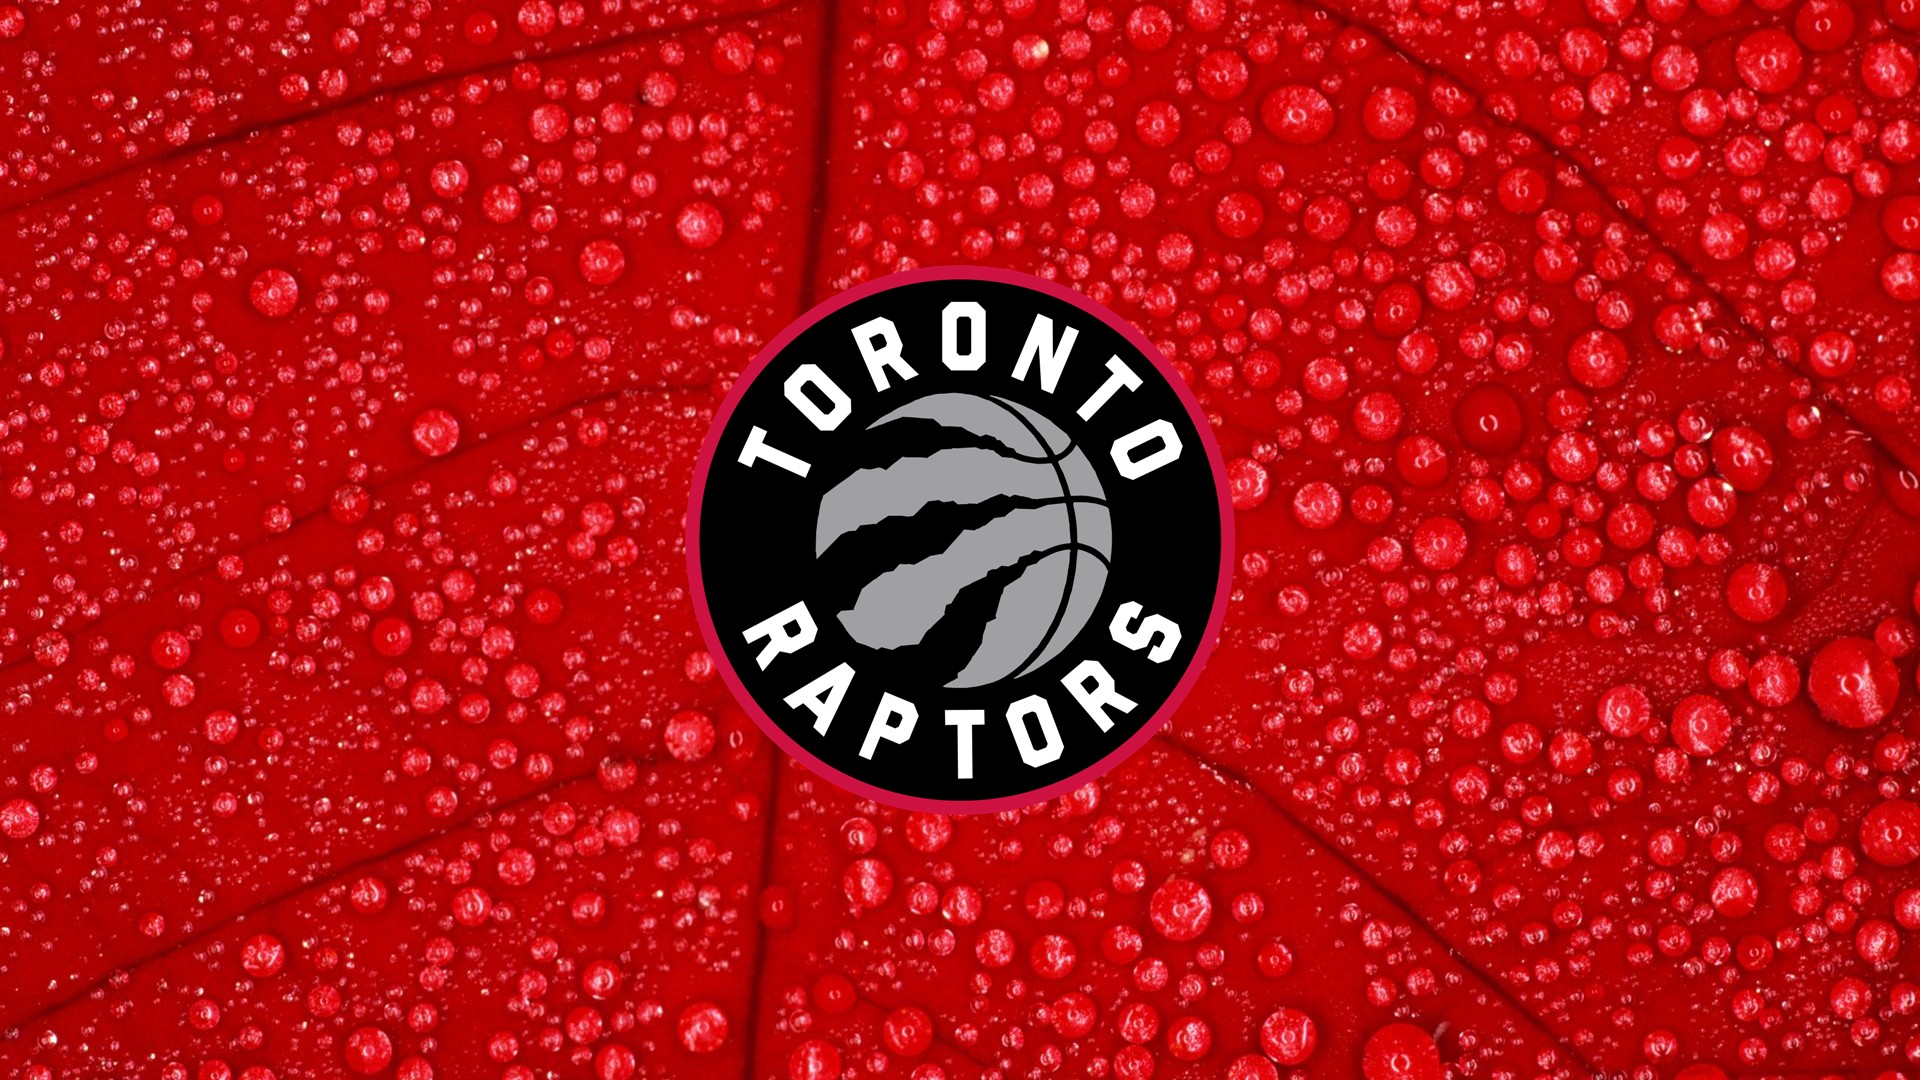 Toronto Raptors HD Wallpapers with image dimensions 1920x1080 pixel. You can make this wallpaper for your Desktop Computer Backgrounds, Windows or Mac Screensavers, iPhone Lock screen, Tablet or Android and another Mobile Phone device